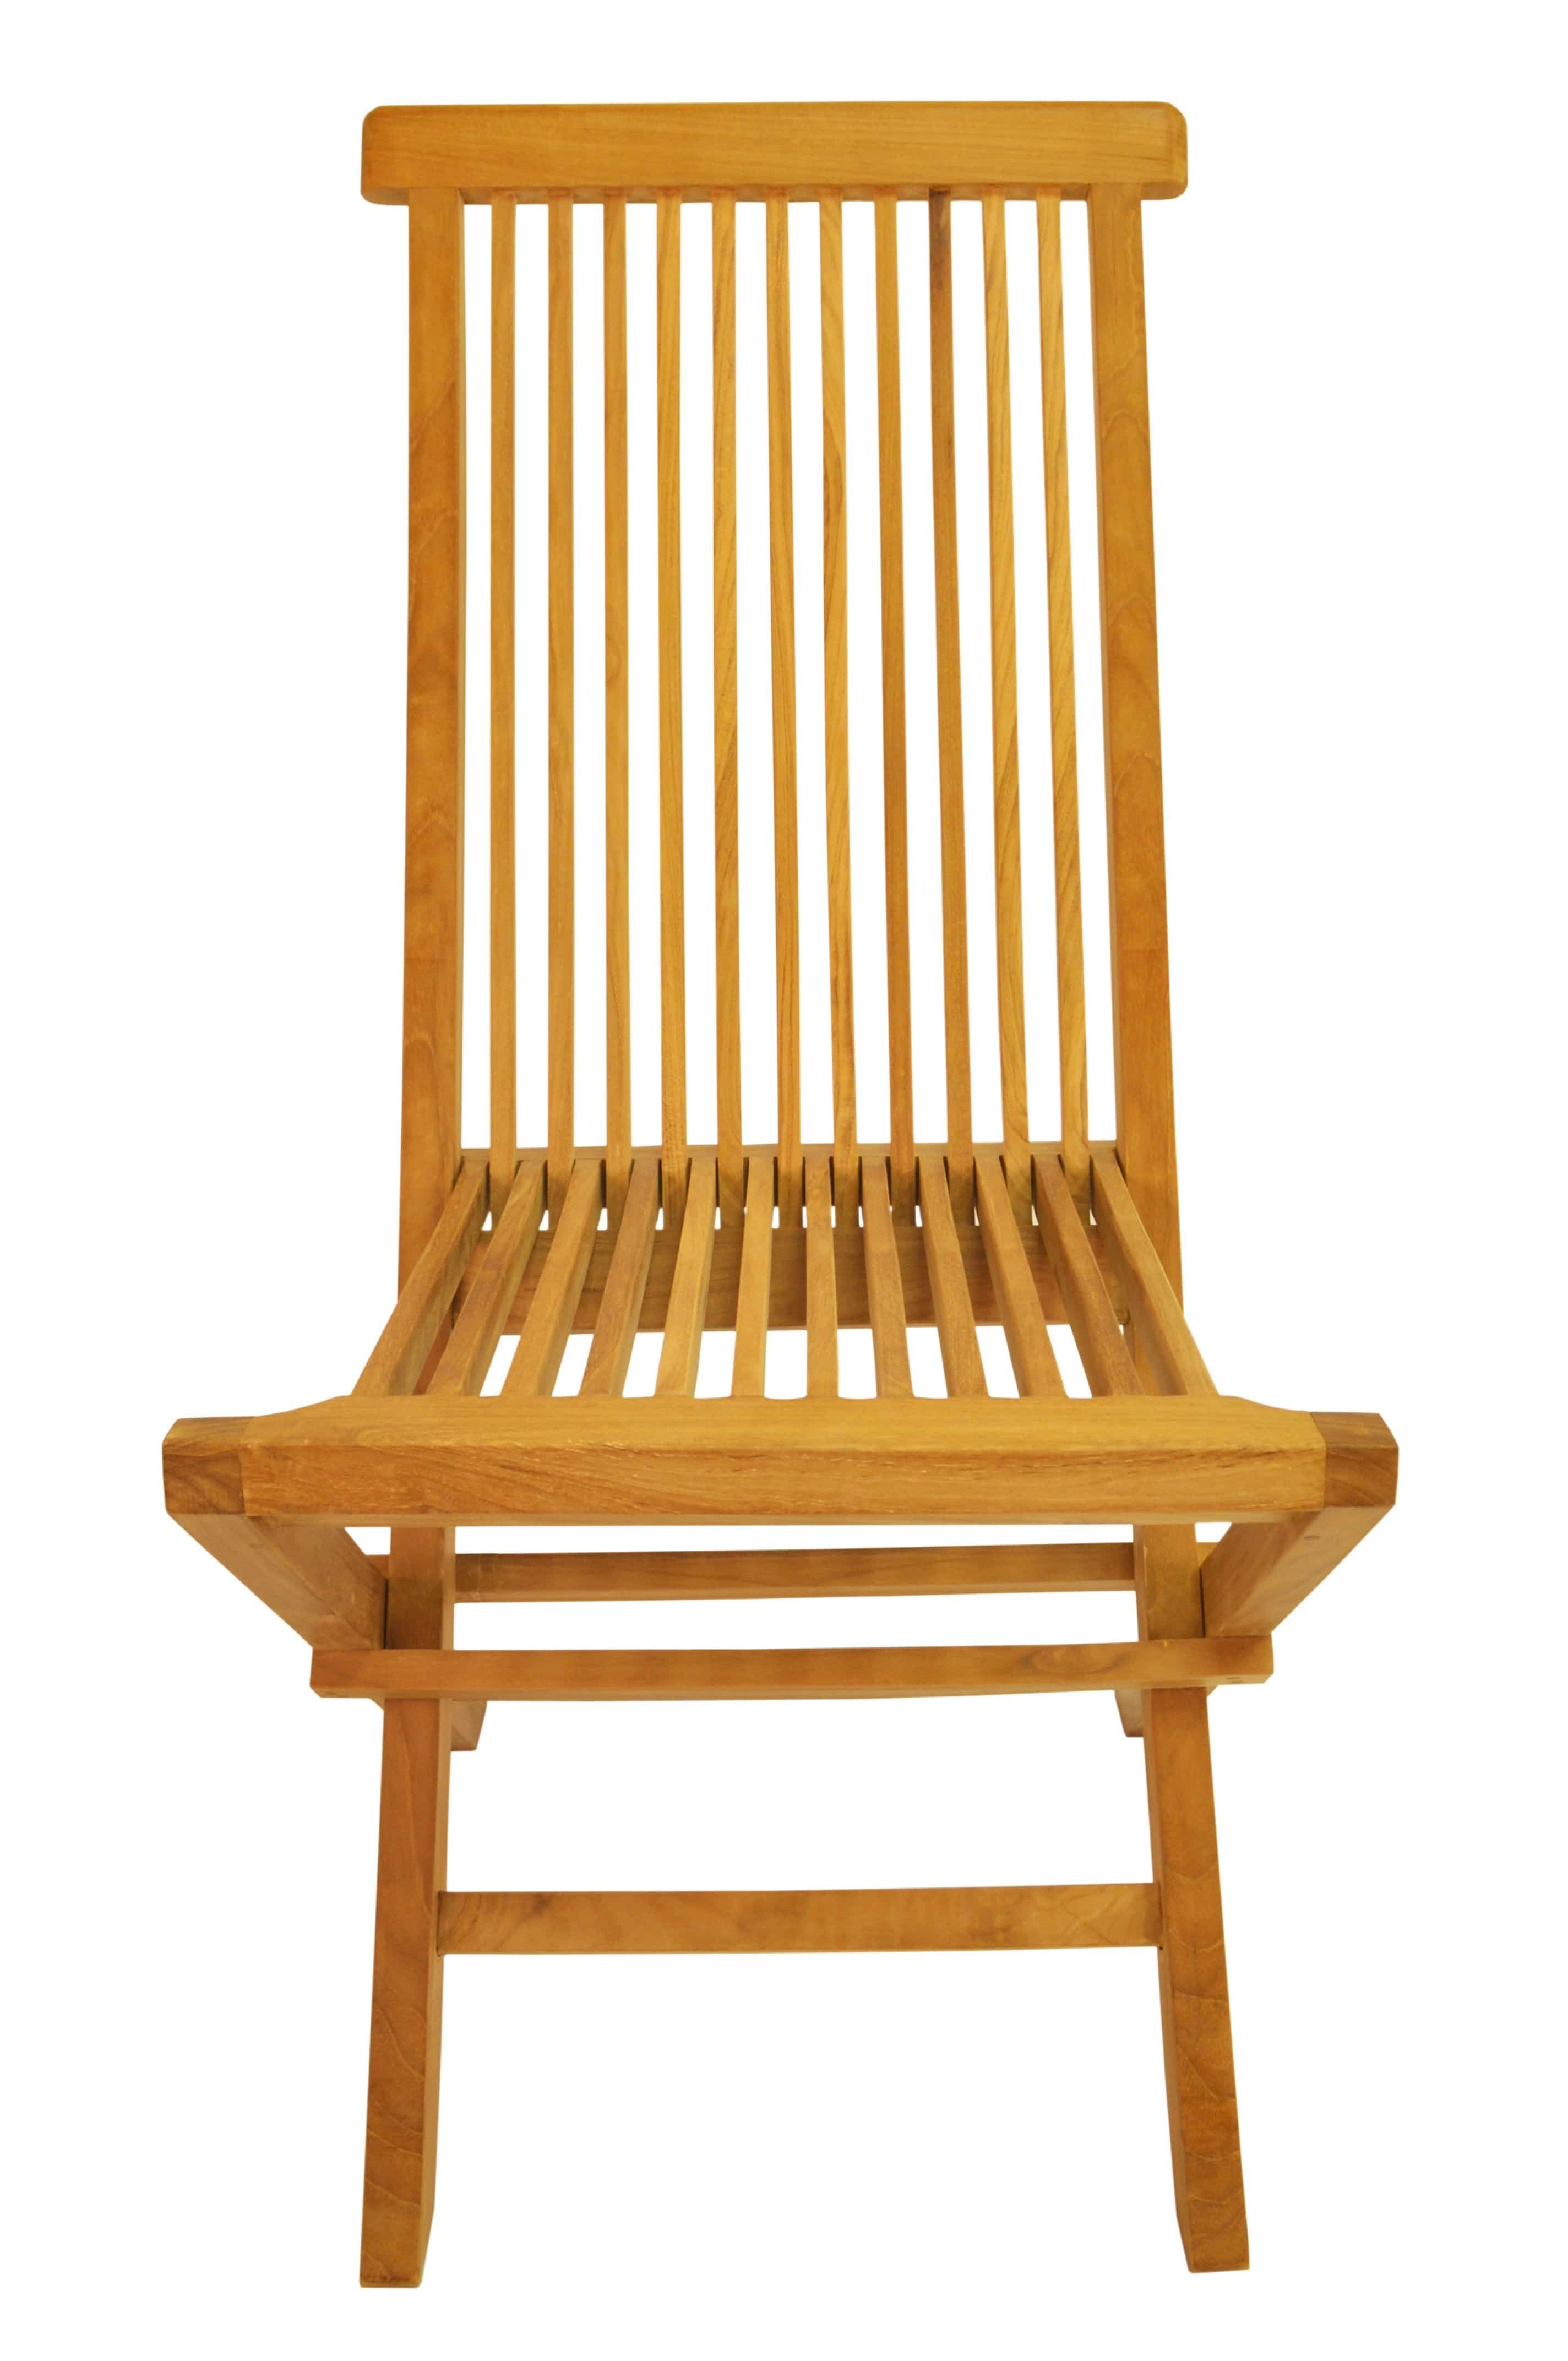 Anderson Teak Outdoor Folding Chairs Anderson Teak Classic Folding Chair (sell & price per 2 chairs only)